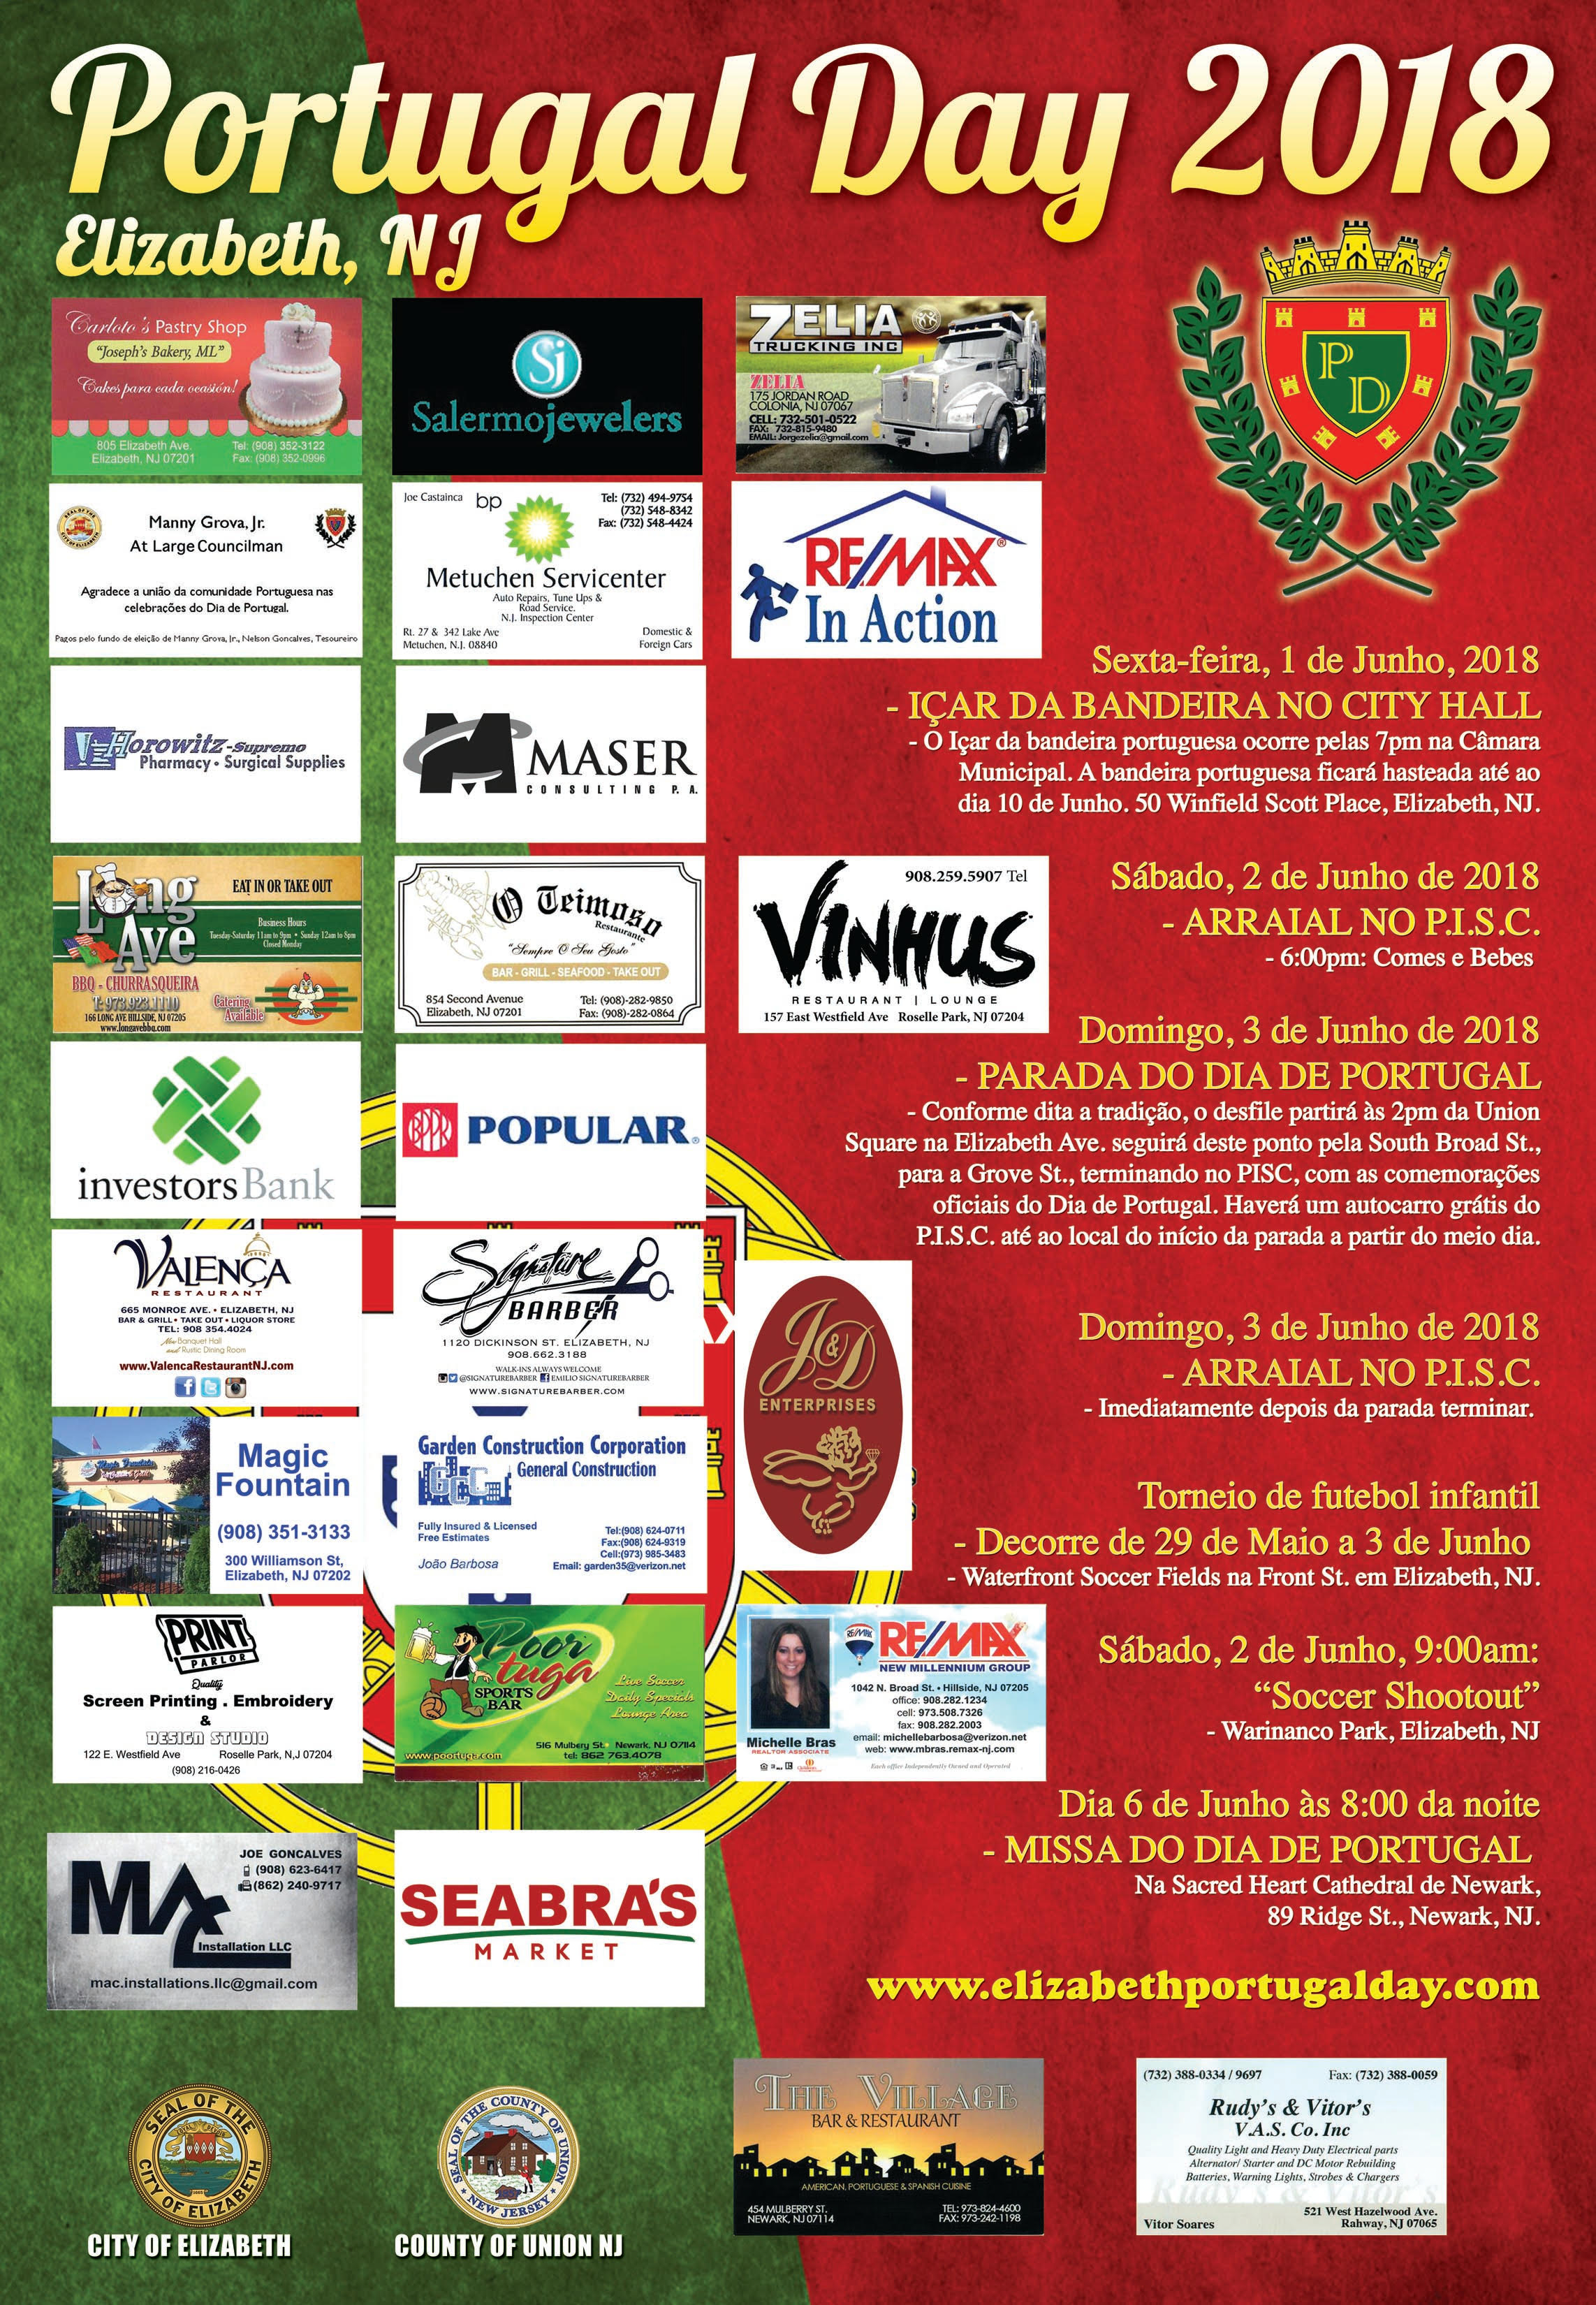 Event Listing & Participating Sponsors